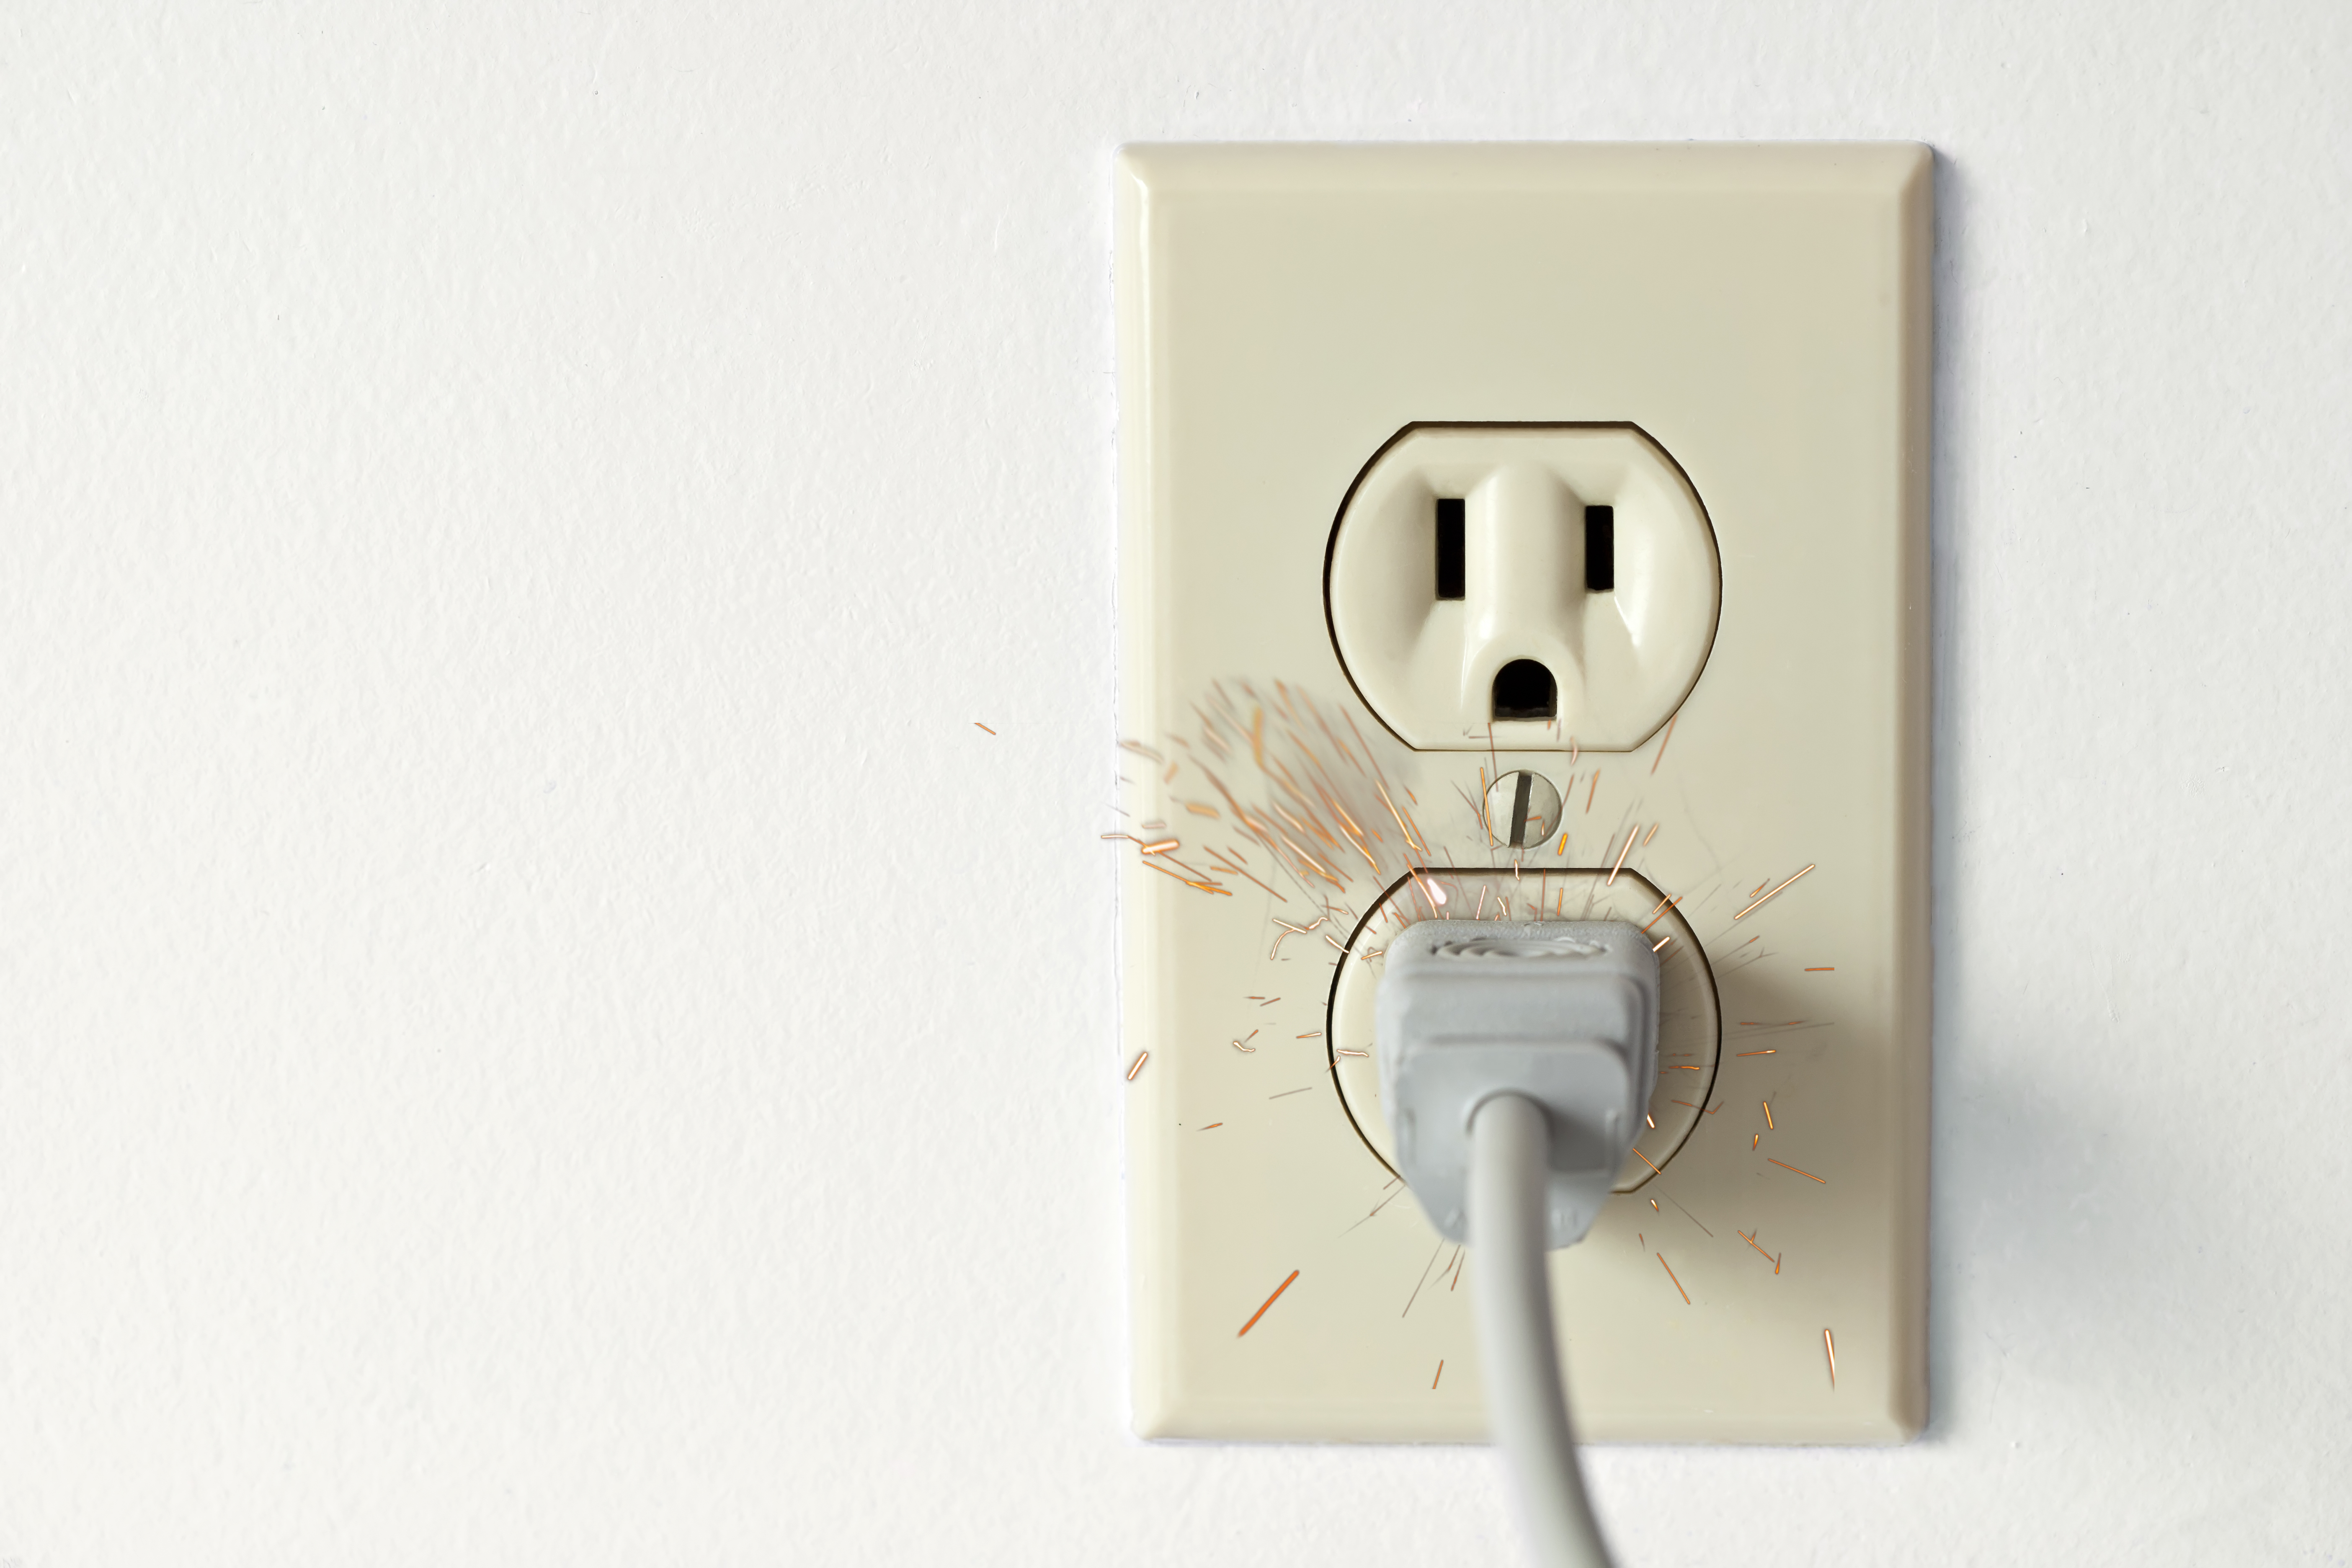 What causes an outlet to spark?